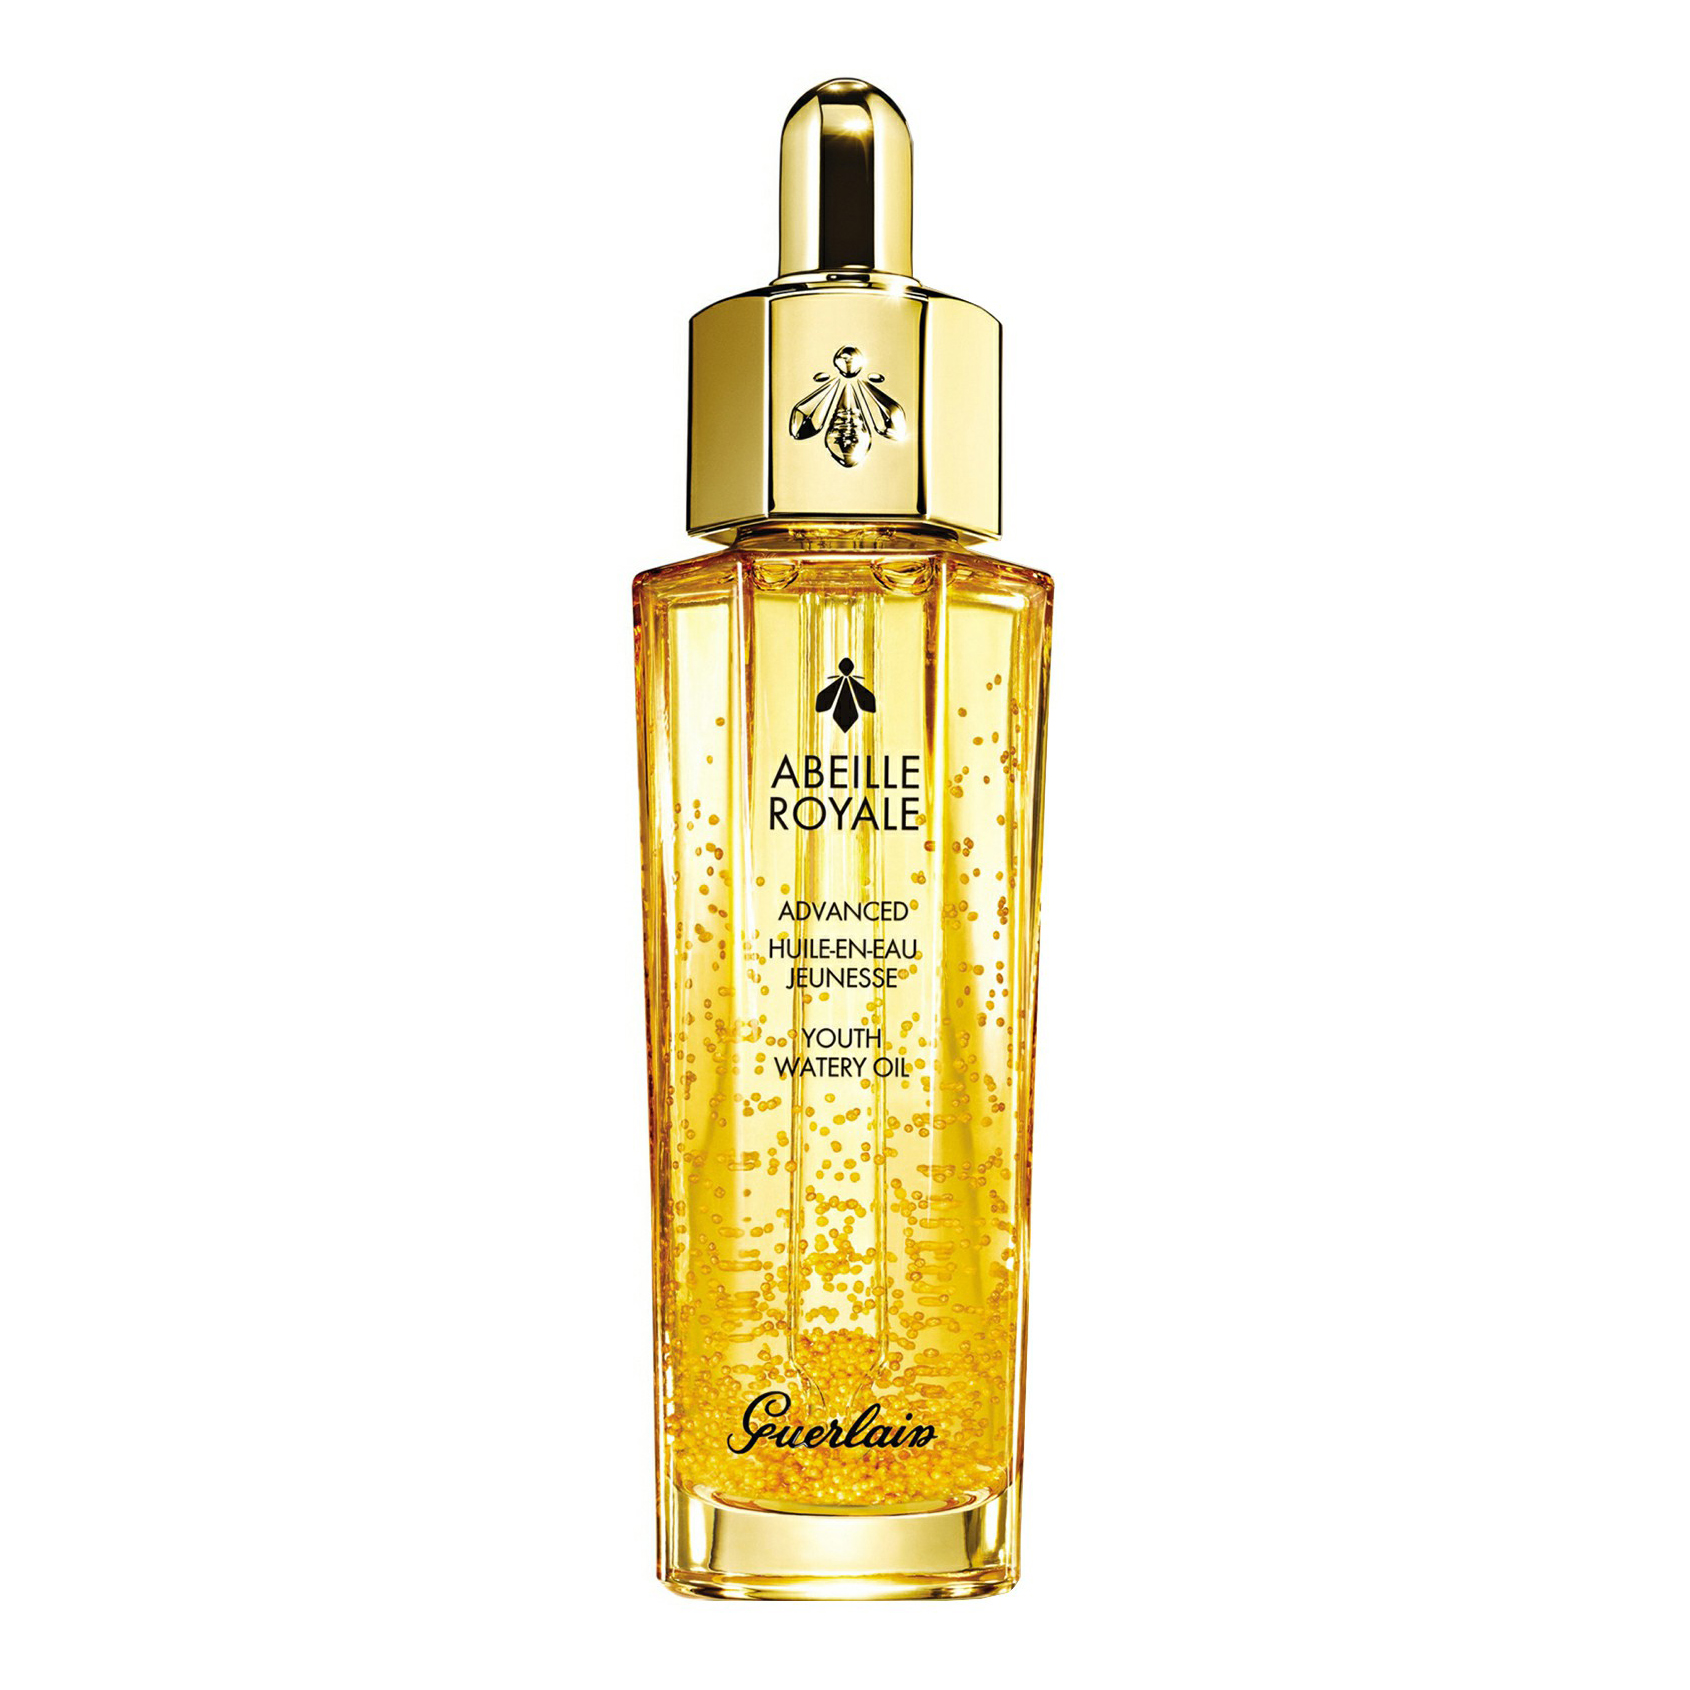 фото Масло для лица guerlain abeille royale advanced youth watery oil, 30 мл